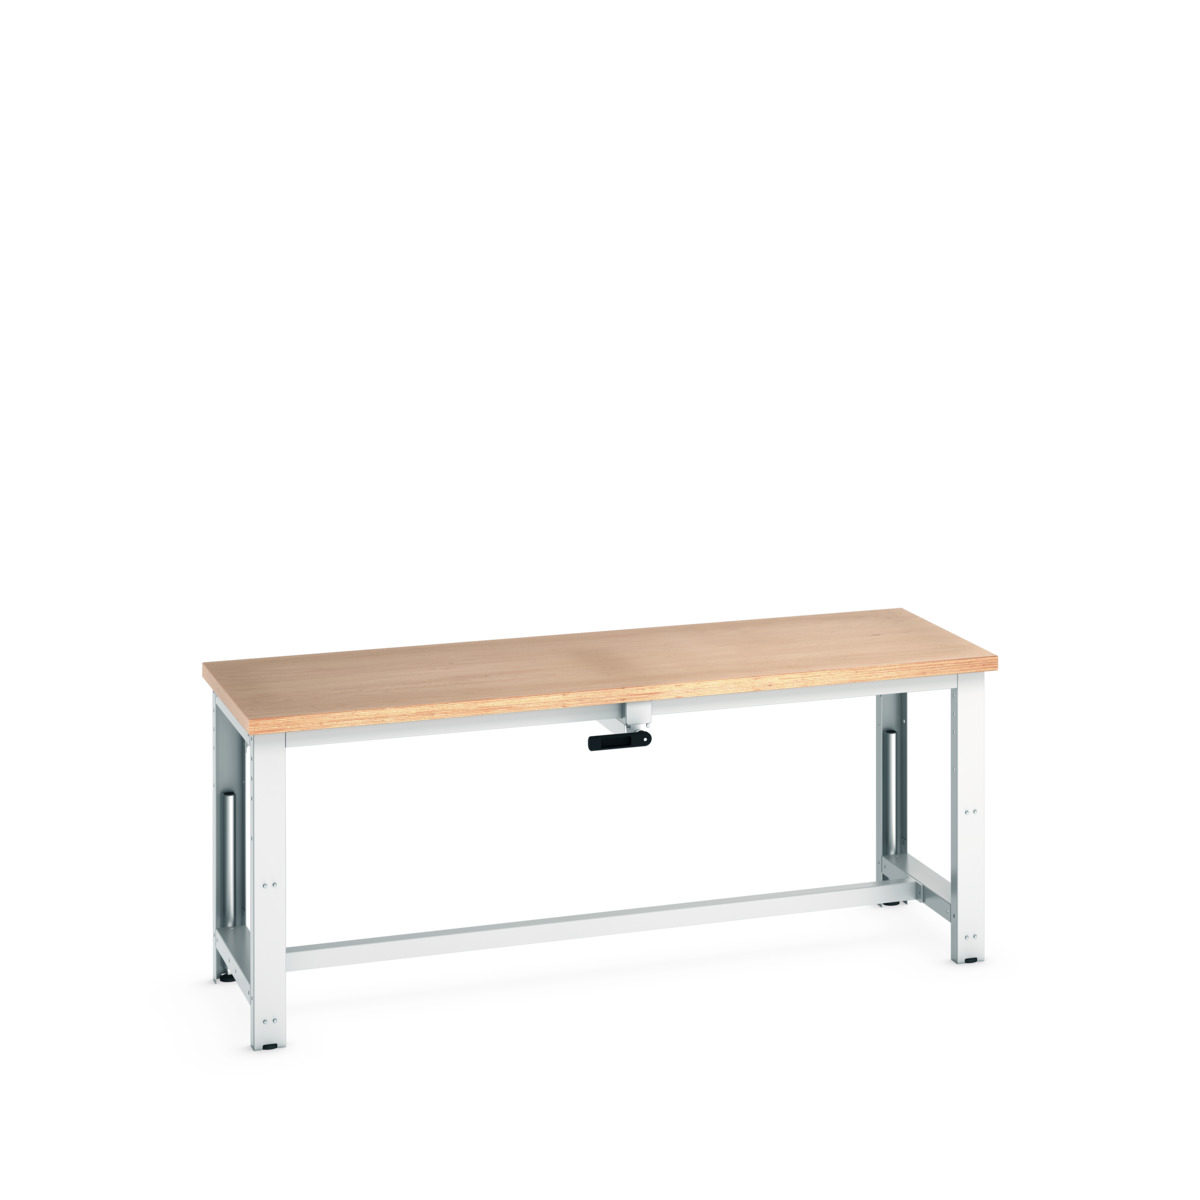 41003572. - cubio stepless adjustable height bench